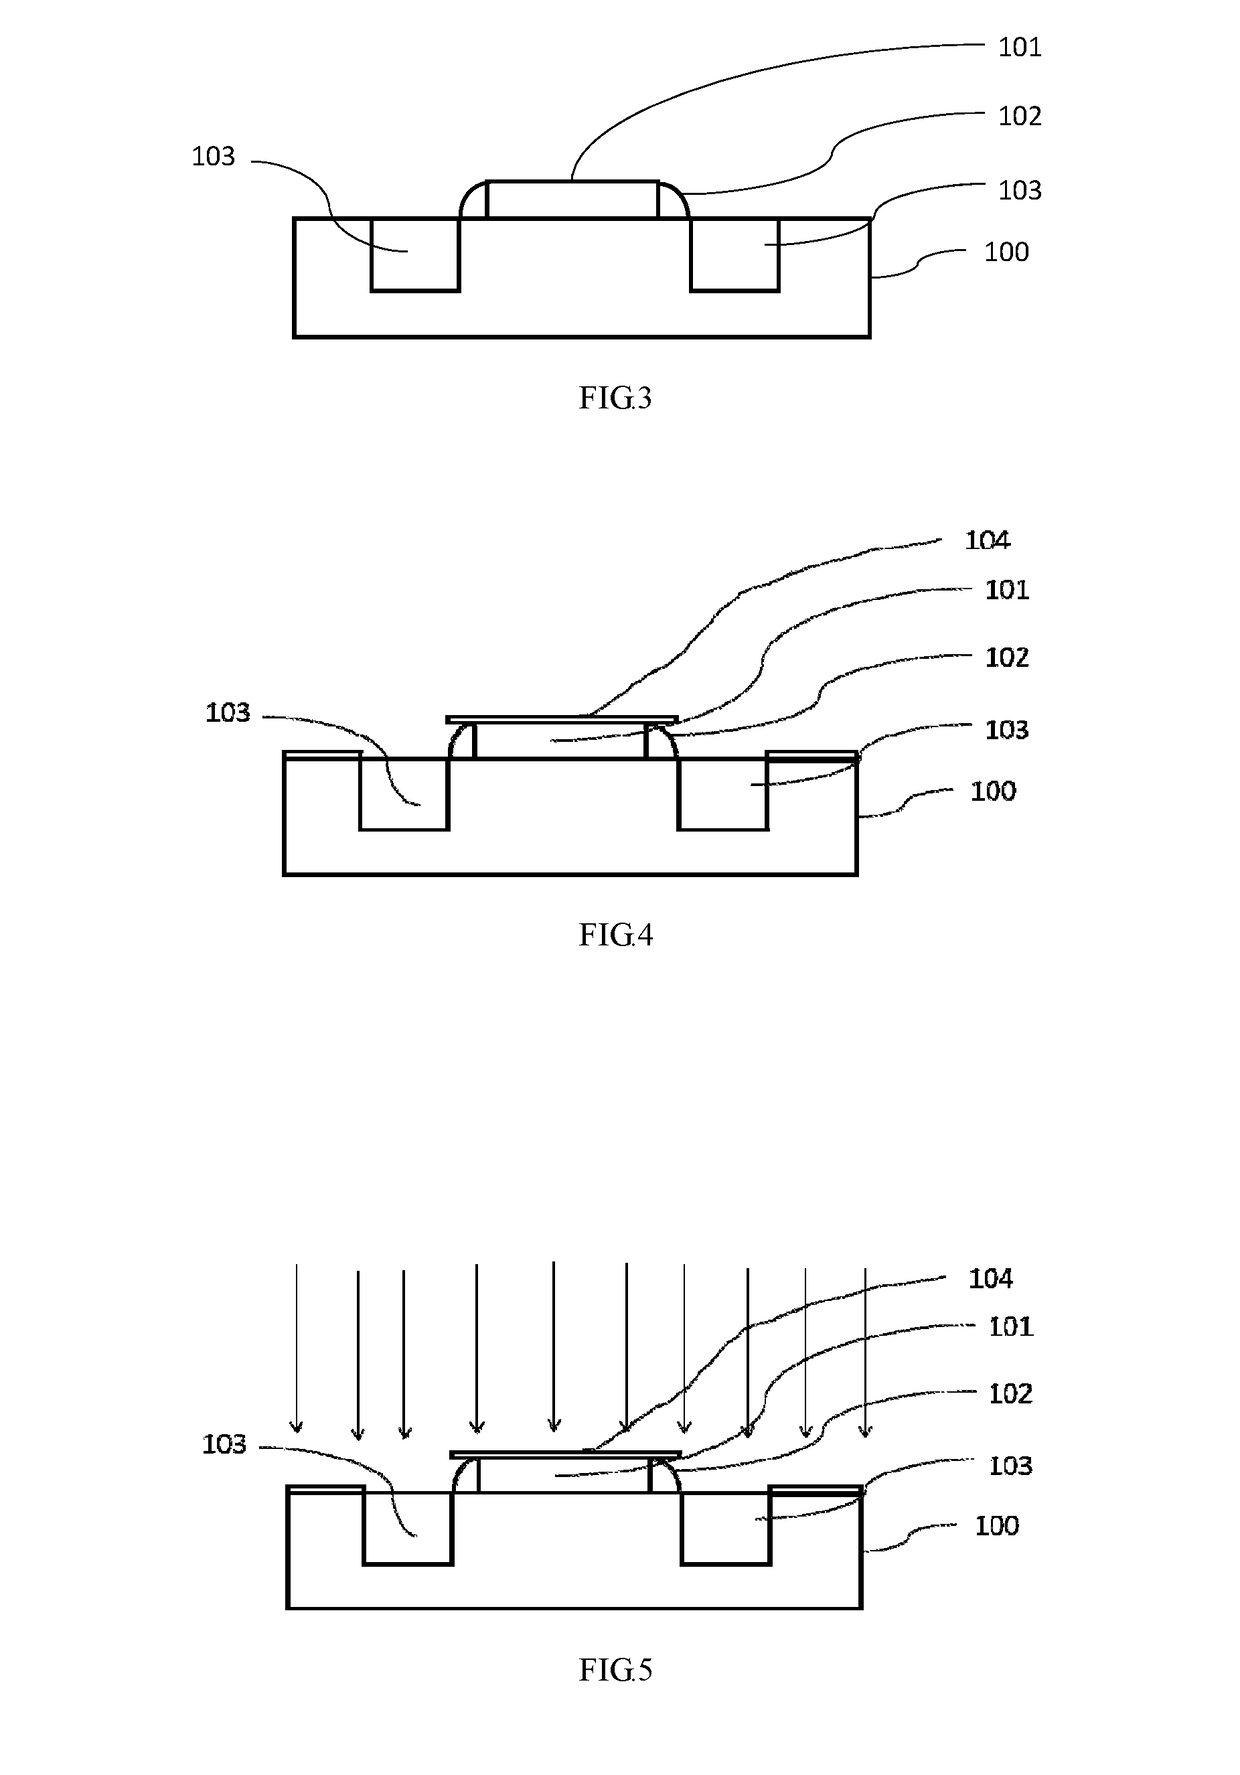 Method of fabricating pmos devices with embedded sige